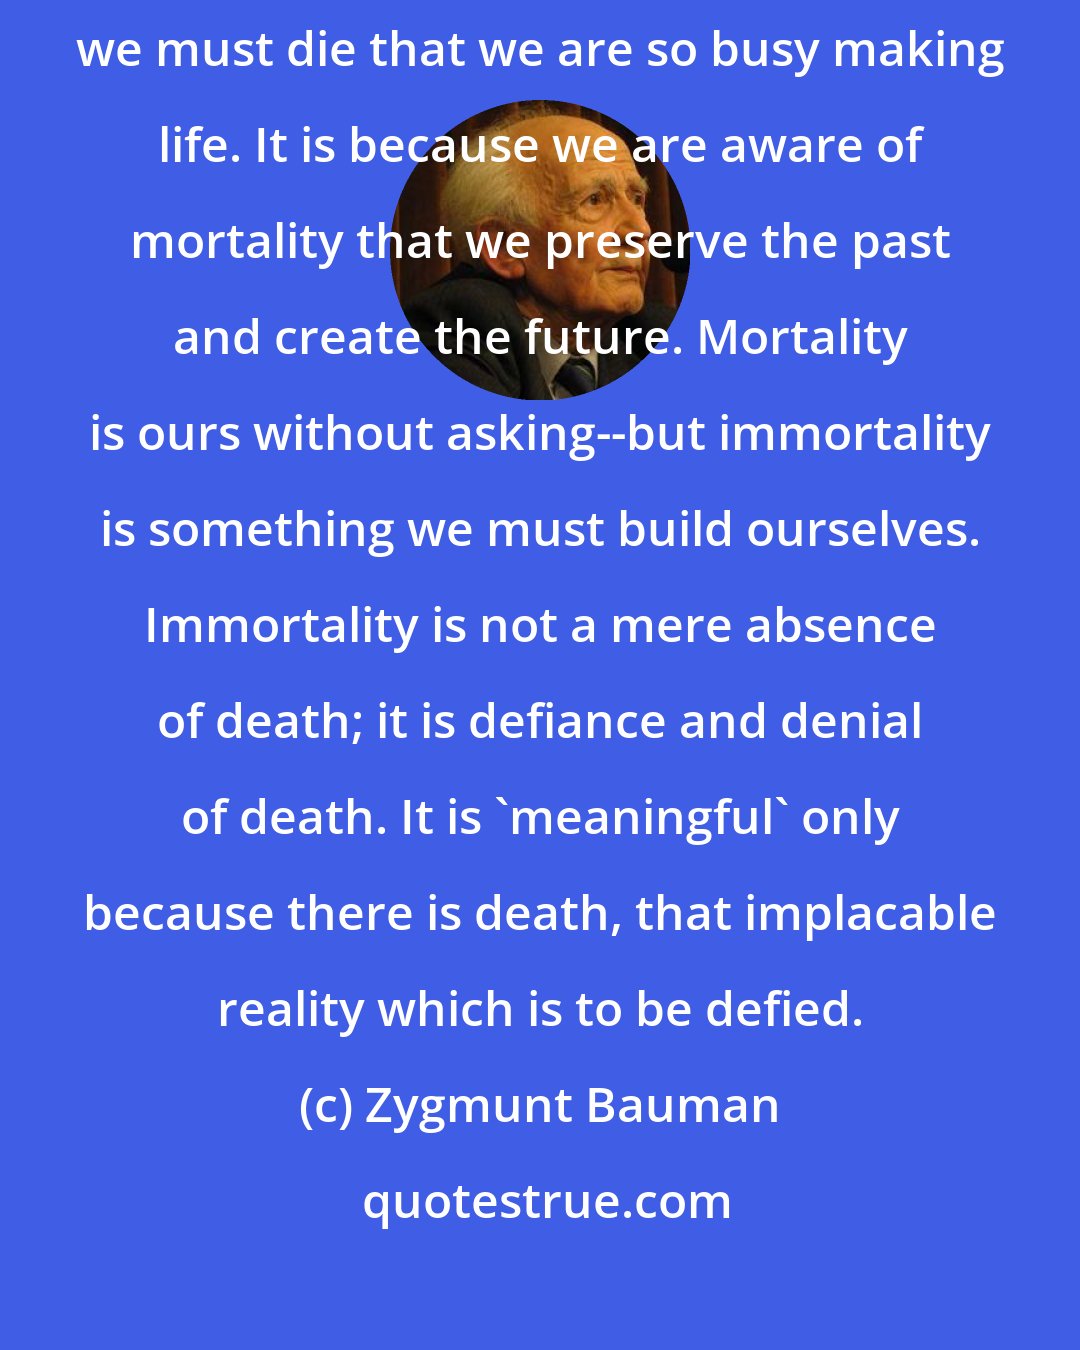 Zygmunt Bauman: The woe of mortality makes humans God-like. It is because we know that we must die that we are so busy making life. It is because we are aware of mortality that we preserve the past and create the future. Mortality is ours without asking--but immortality is something we must build ourselves. Immortality is not a mere absence of death; it is defiance and denial of death. It is 'meaningful' only because there is death, that implacable reality which is to be defied.